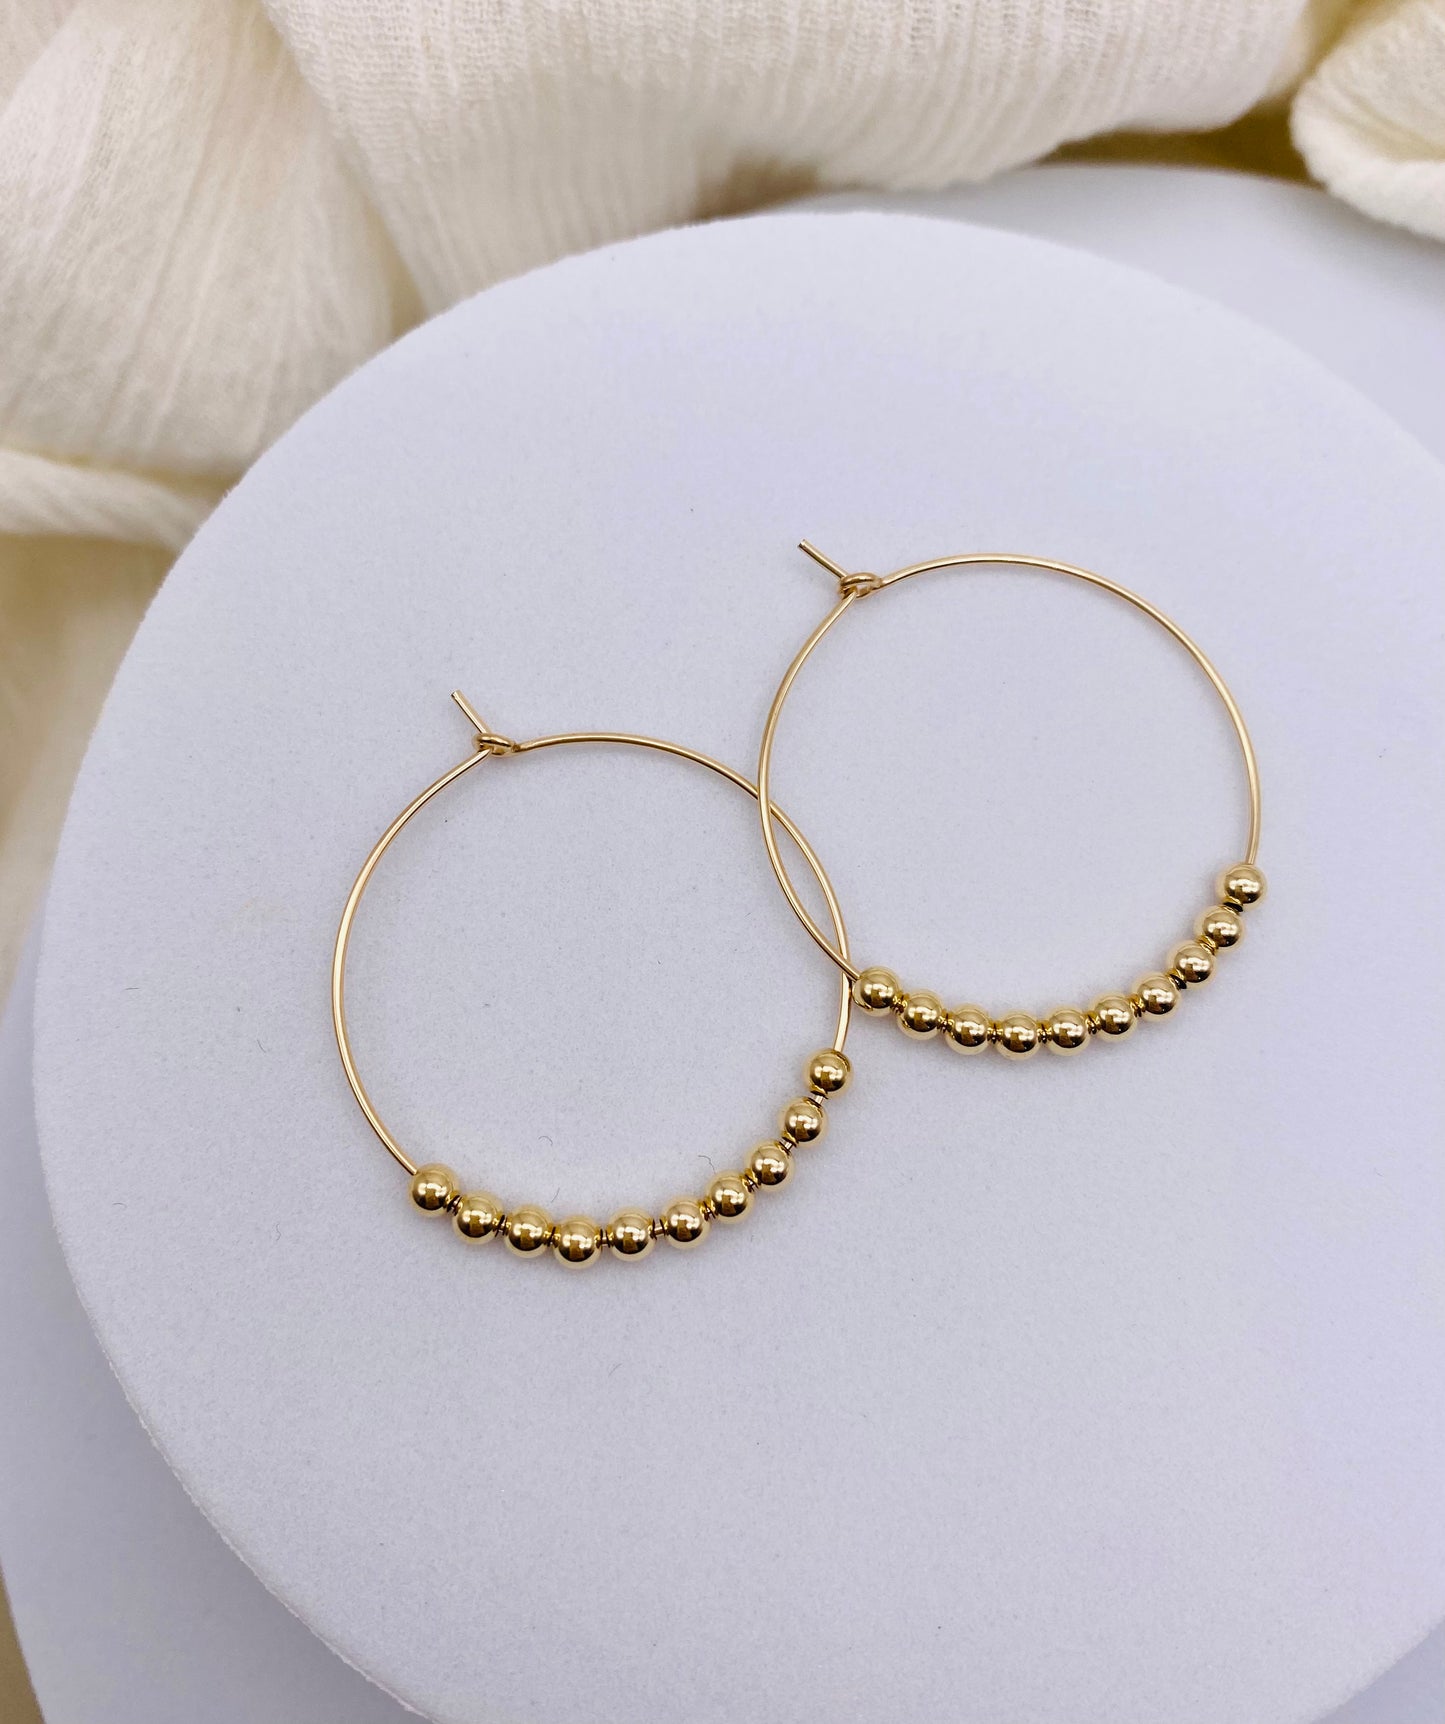 Gold Beaded Hoops - 3 Sizes of